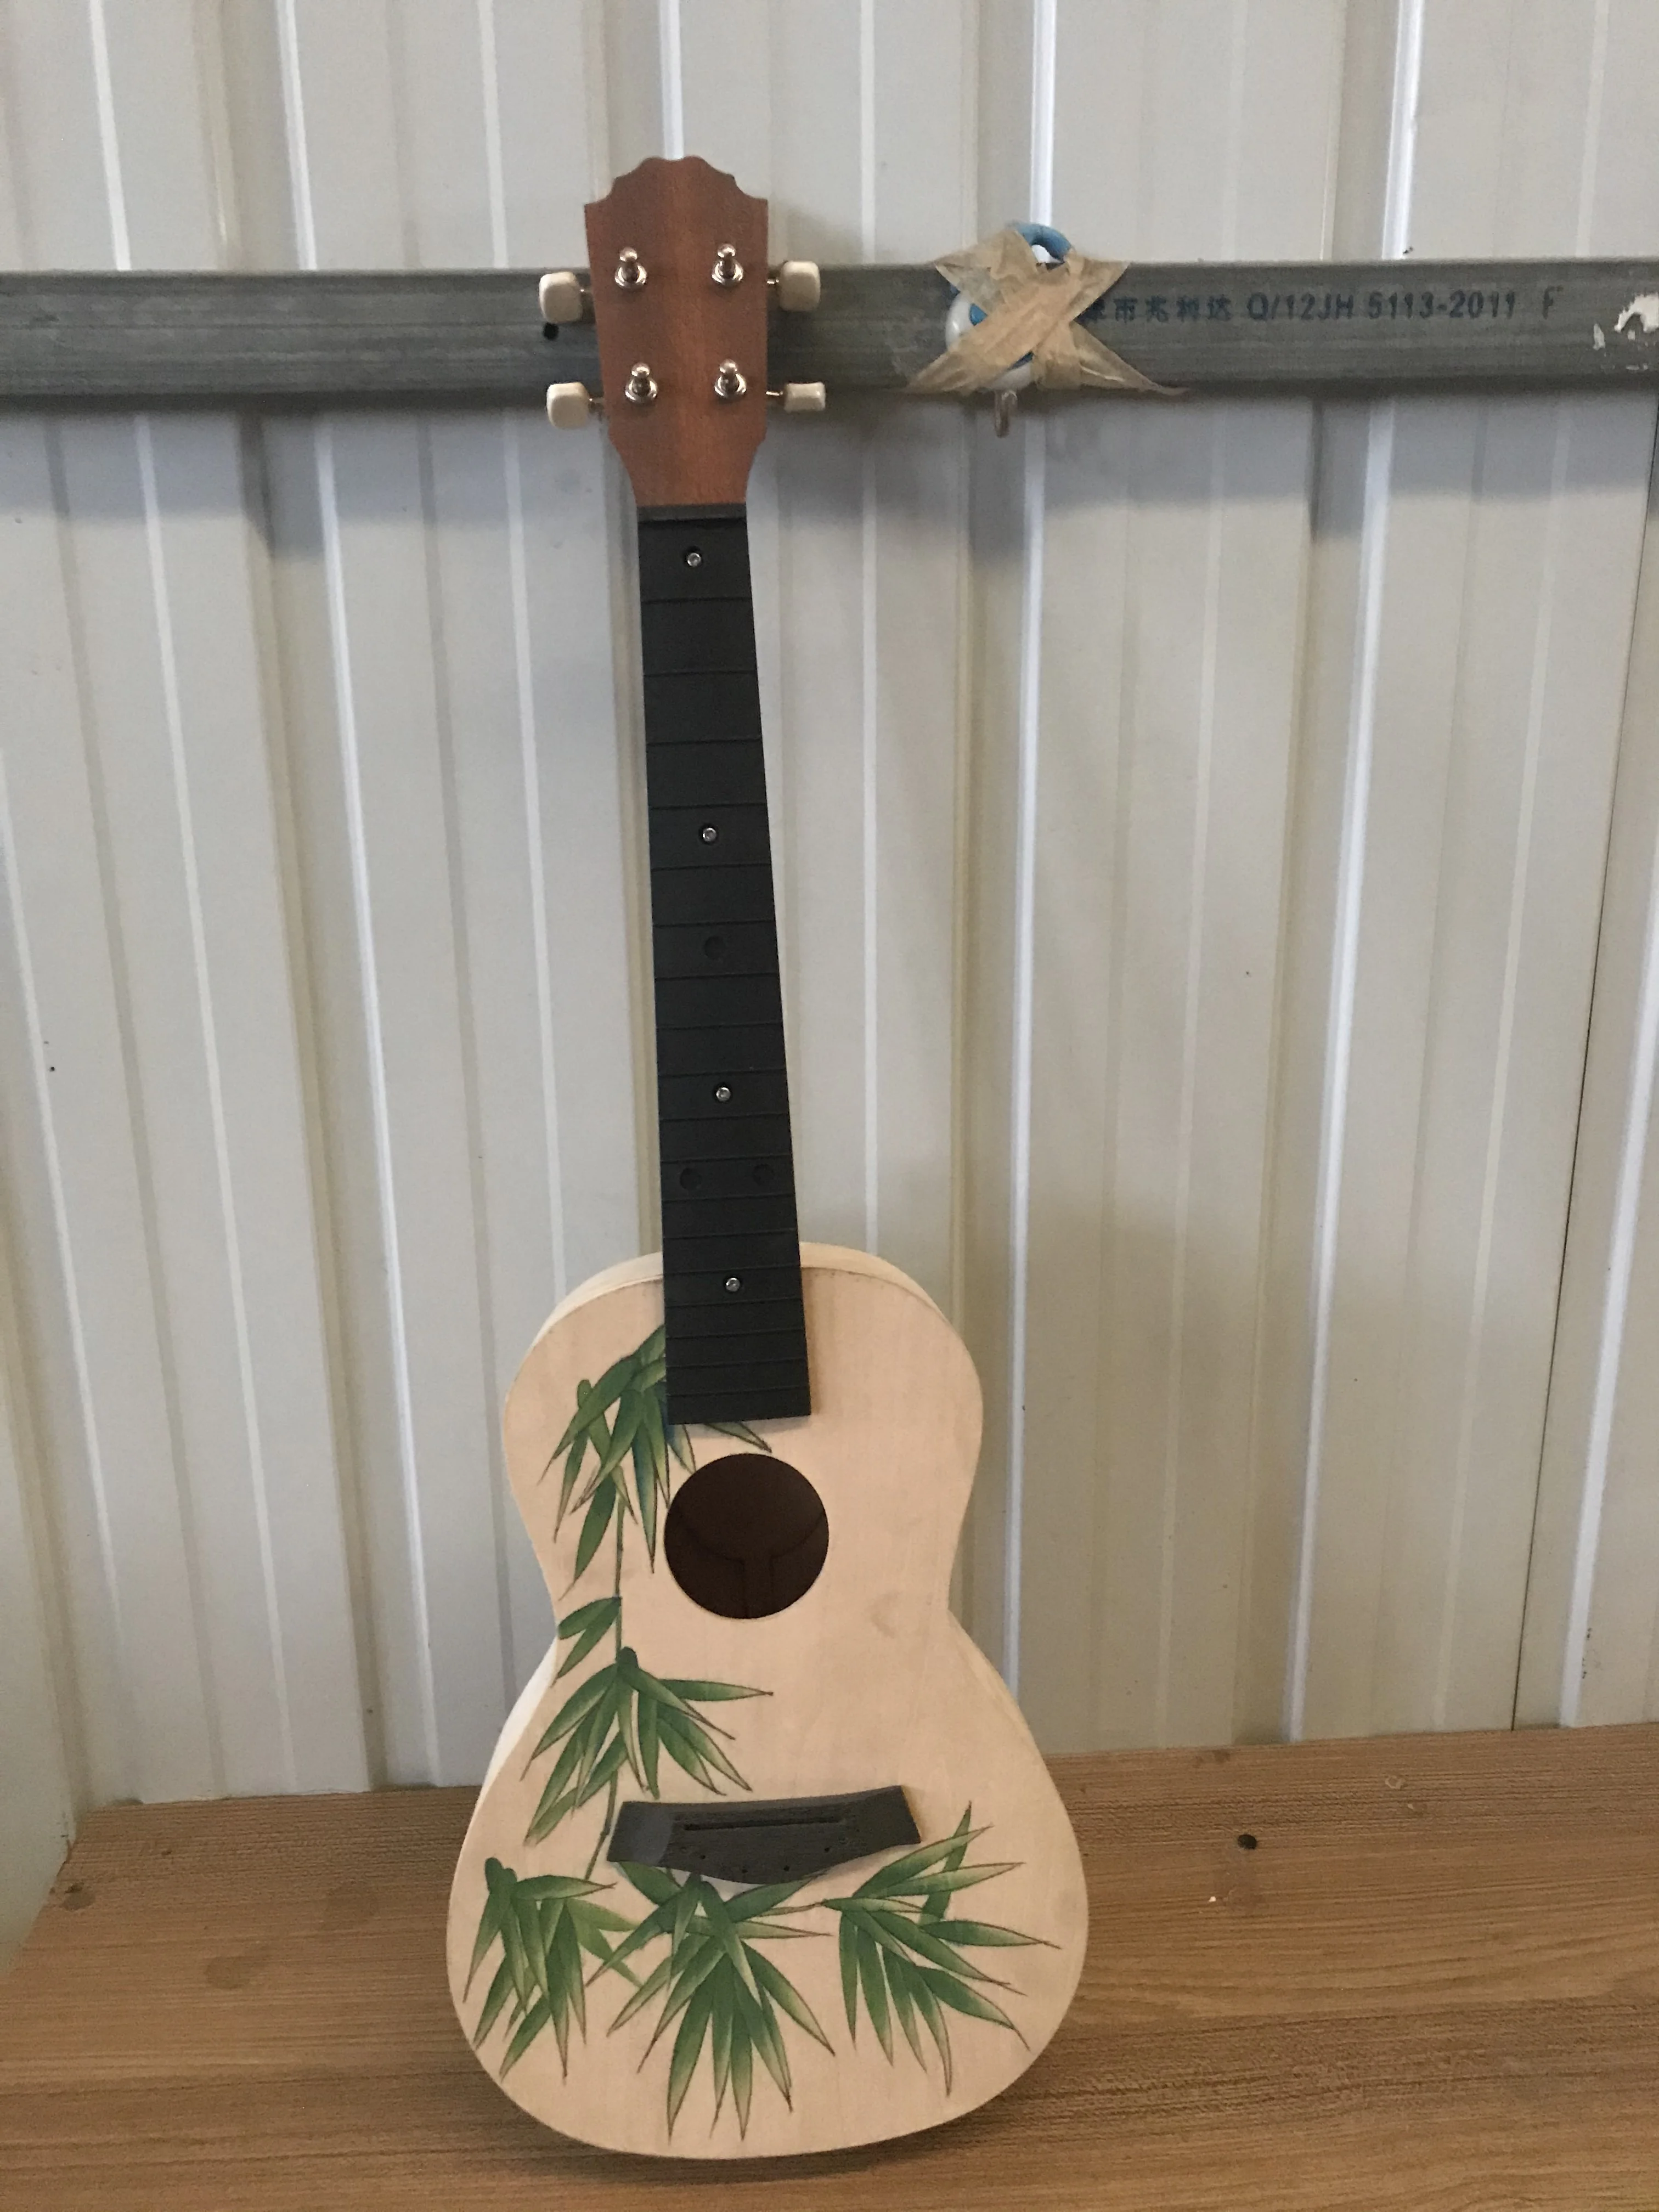 1 Pcs 26 Inch Hand Painted Uklele With All Accessories East Art Mini Guitar in High Quality Solid Wood DIY for Chiladren enlarge